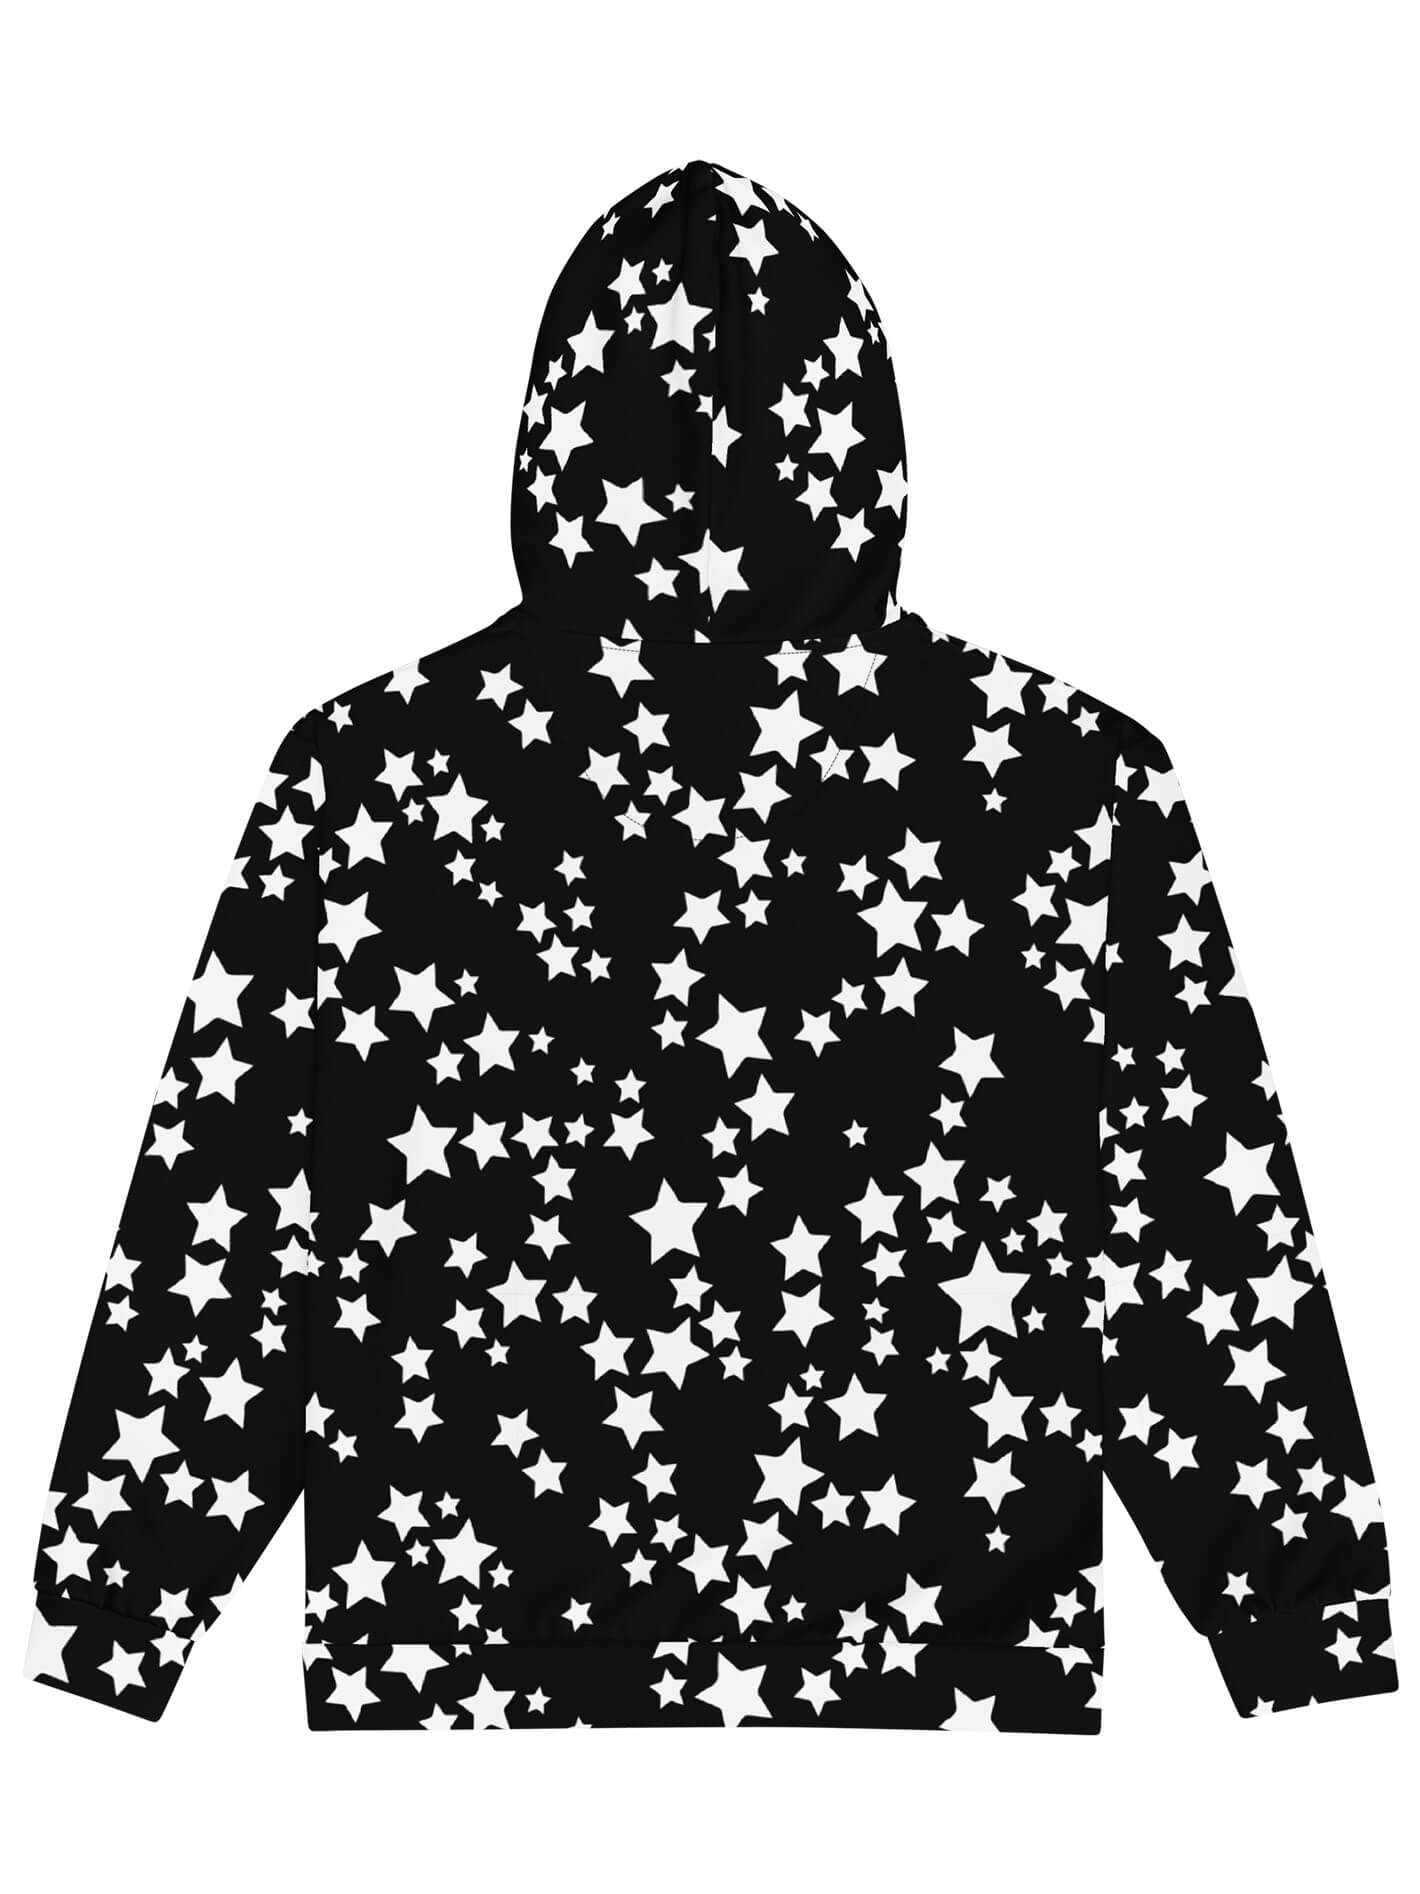 Black and white star plus size hoodie.